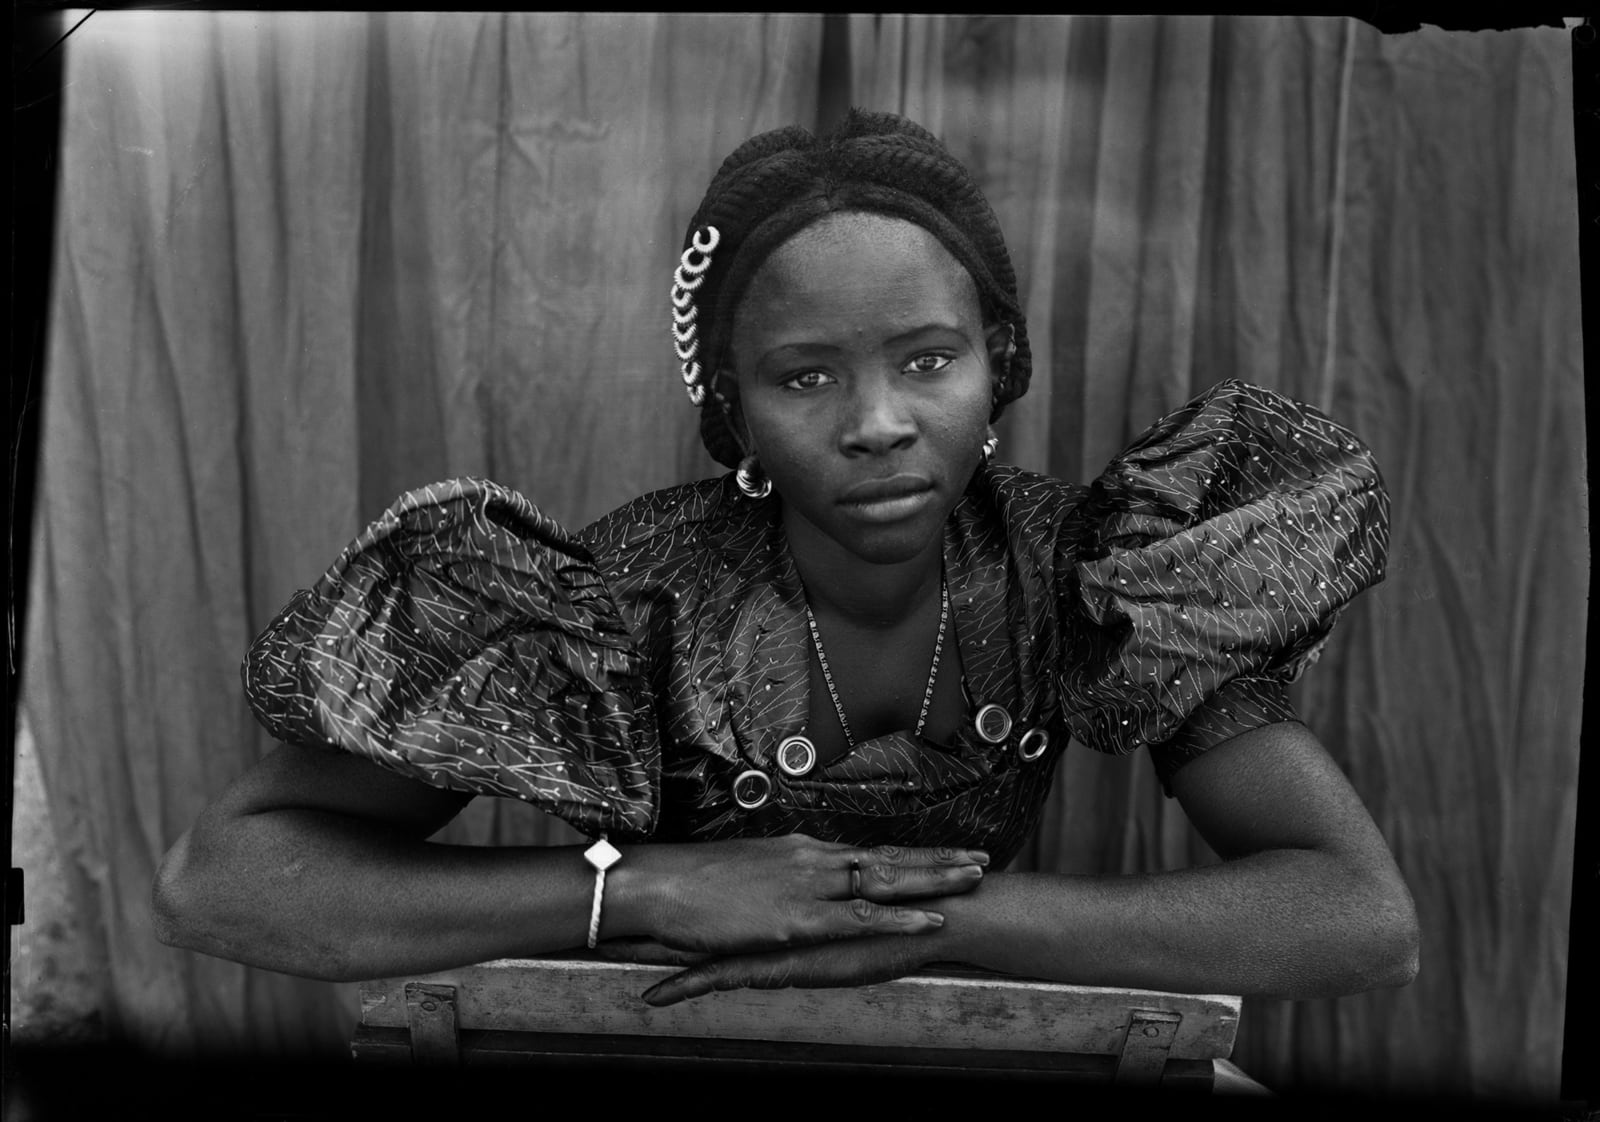 Seydou Keïta Sans titre/ Untitled (06878), 1952-1955 Posthumous Gelatin black and white silver print on cartoline paper 280g 60 x 50 cm (23 5/8 x 19 5/8 in.) Edition of 10 + 2 AP Posthumous Gelatin black and white silver print on cartoline paper 280g back-mounted on Aluminium 1mm 162 x 122 cm (63 25/32 x 48 1/32 in) Edition of 5 + 2 AP